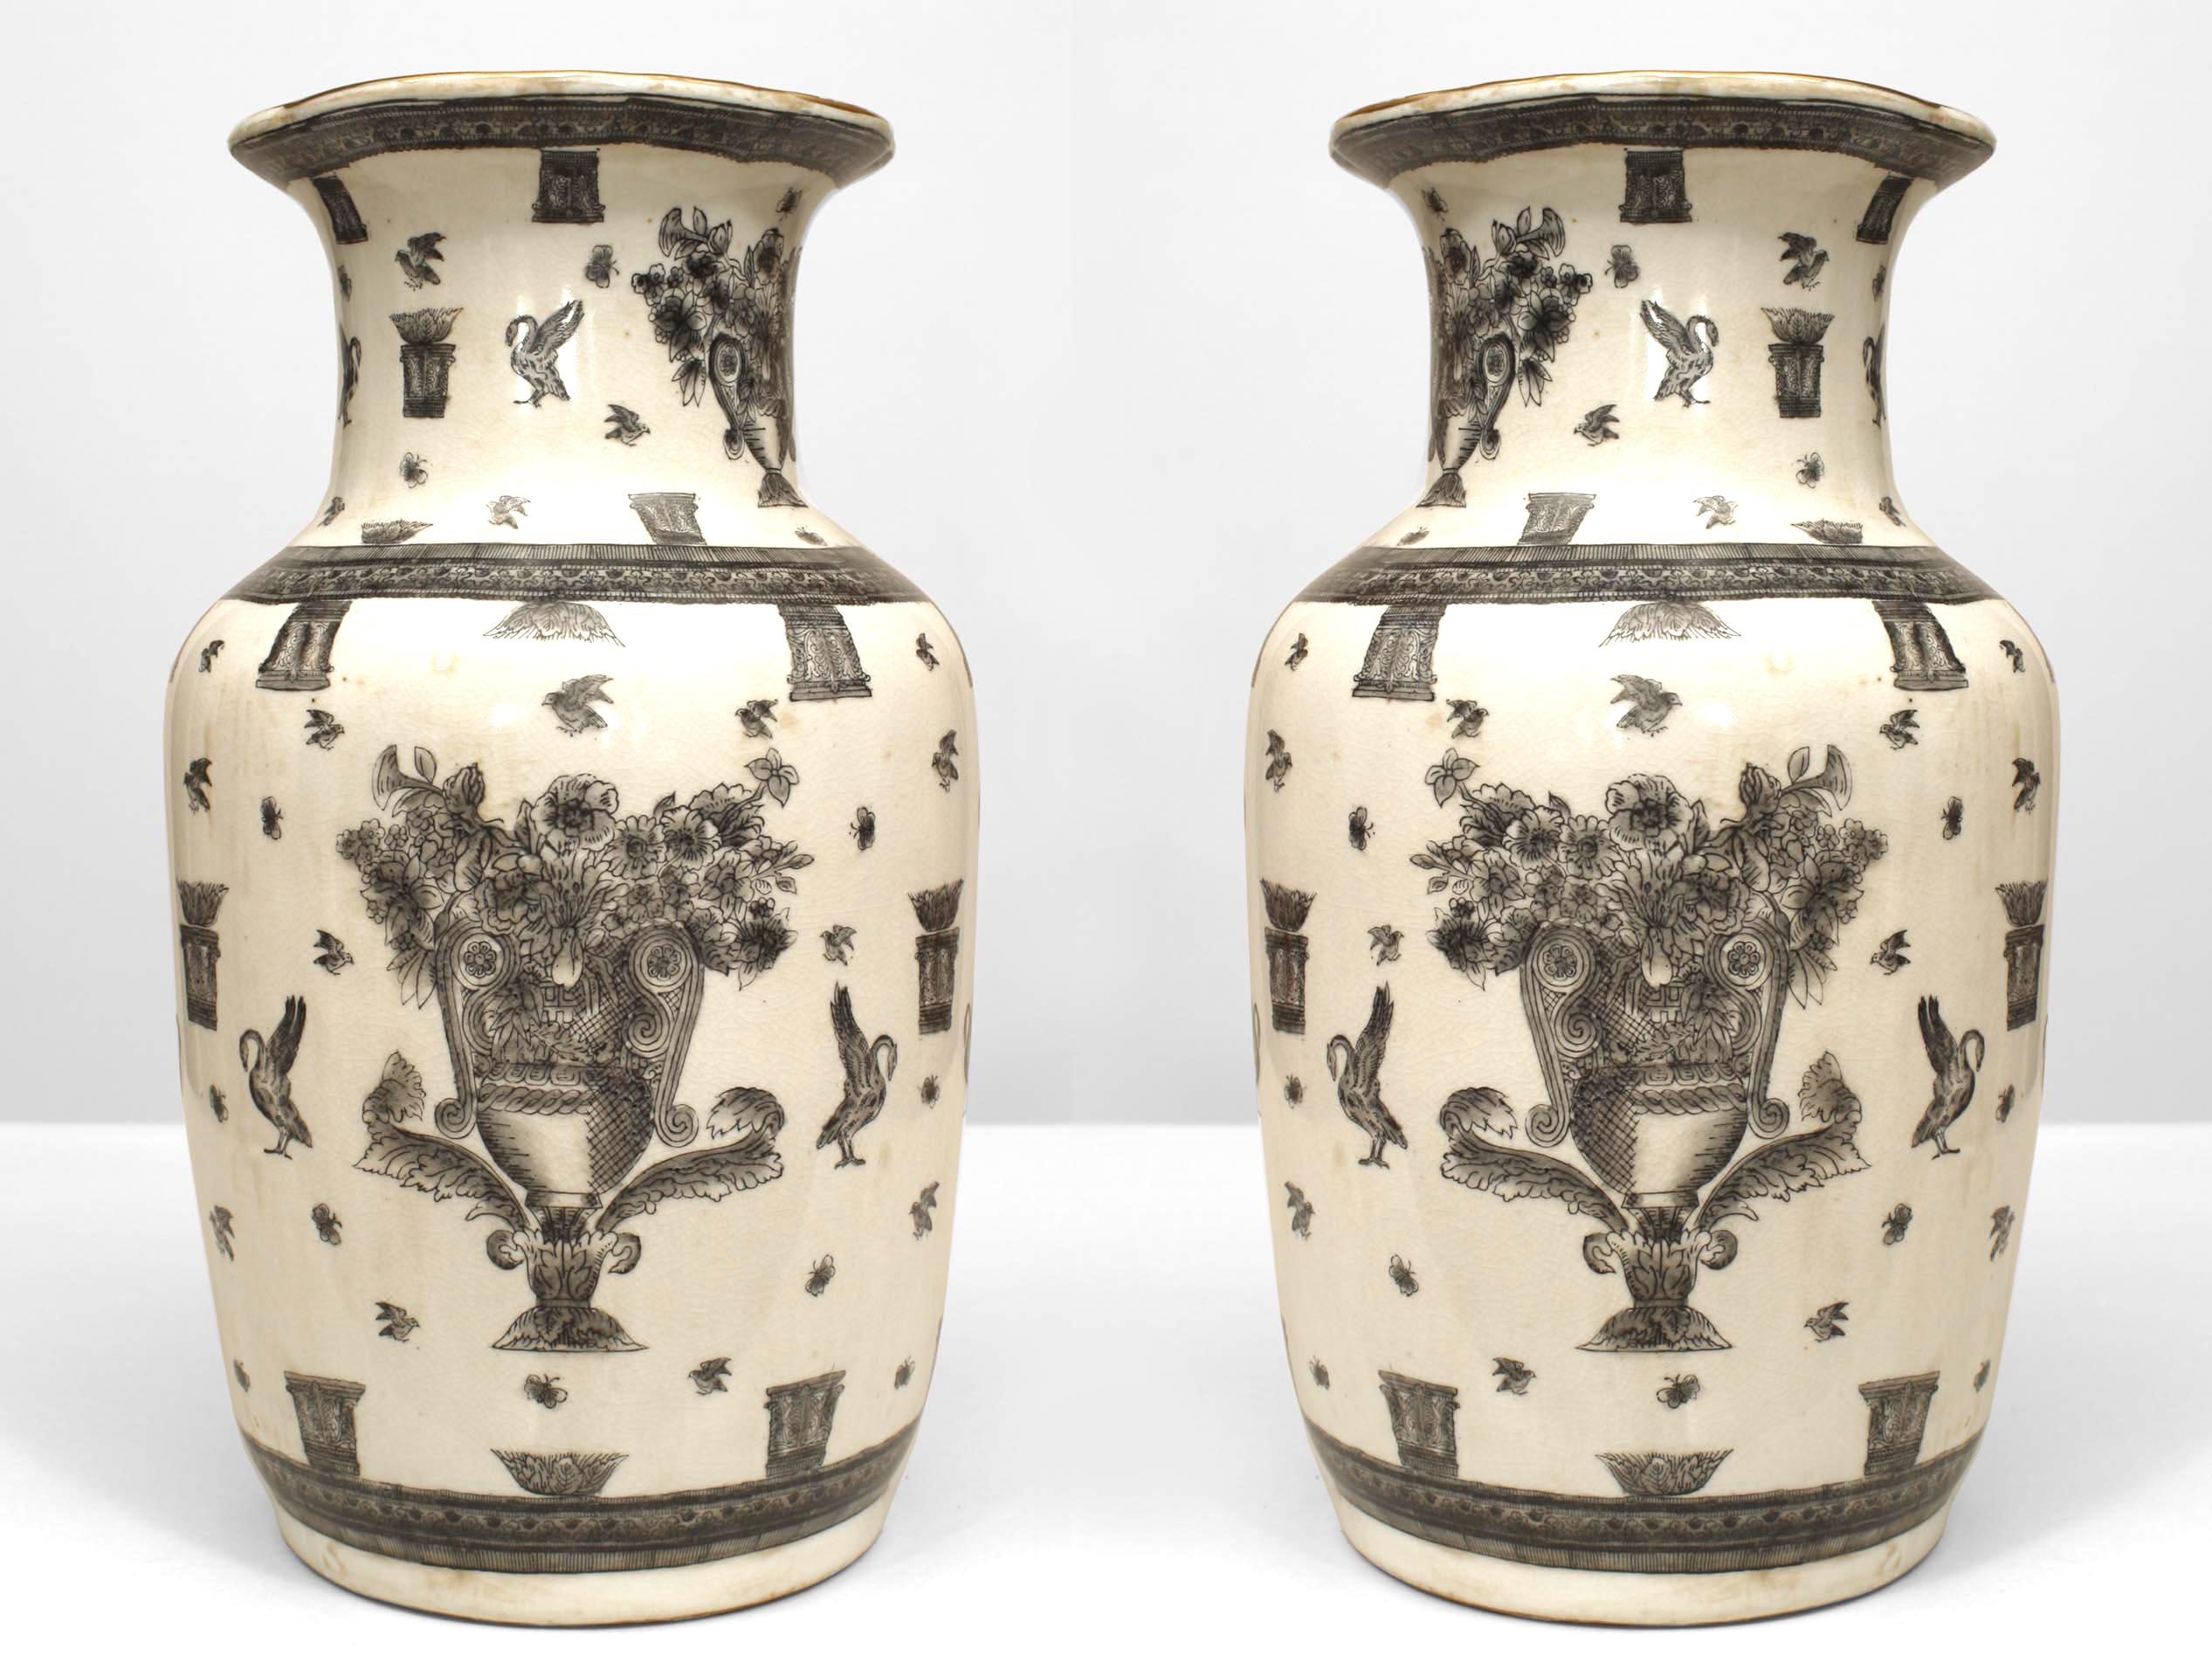 19th Century Pair of Chinese White and Black Porcelain Urns For Sale